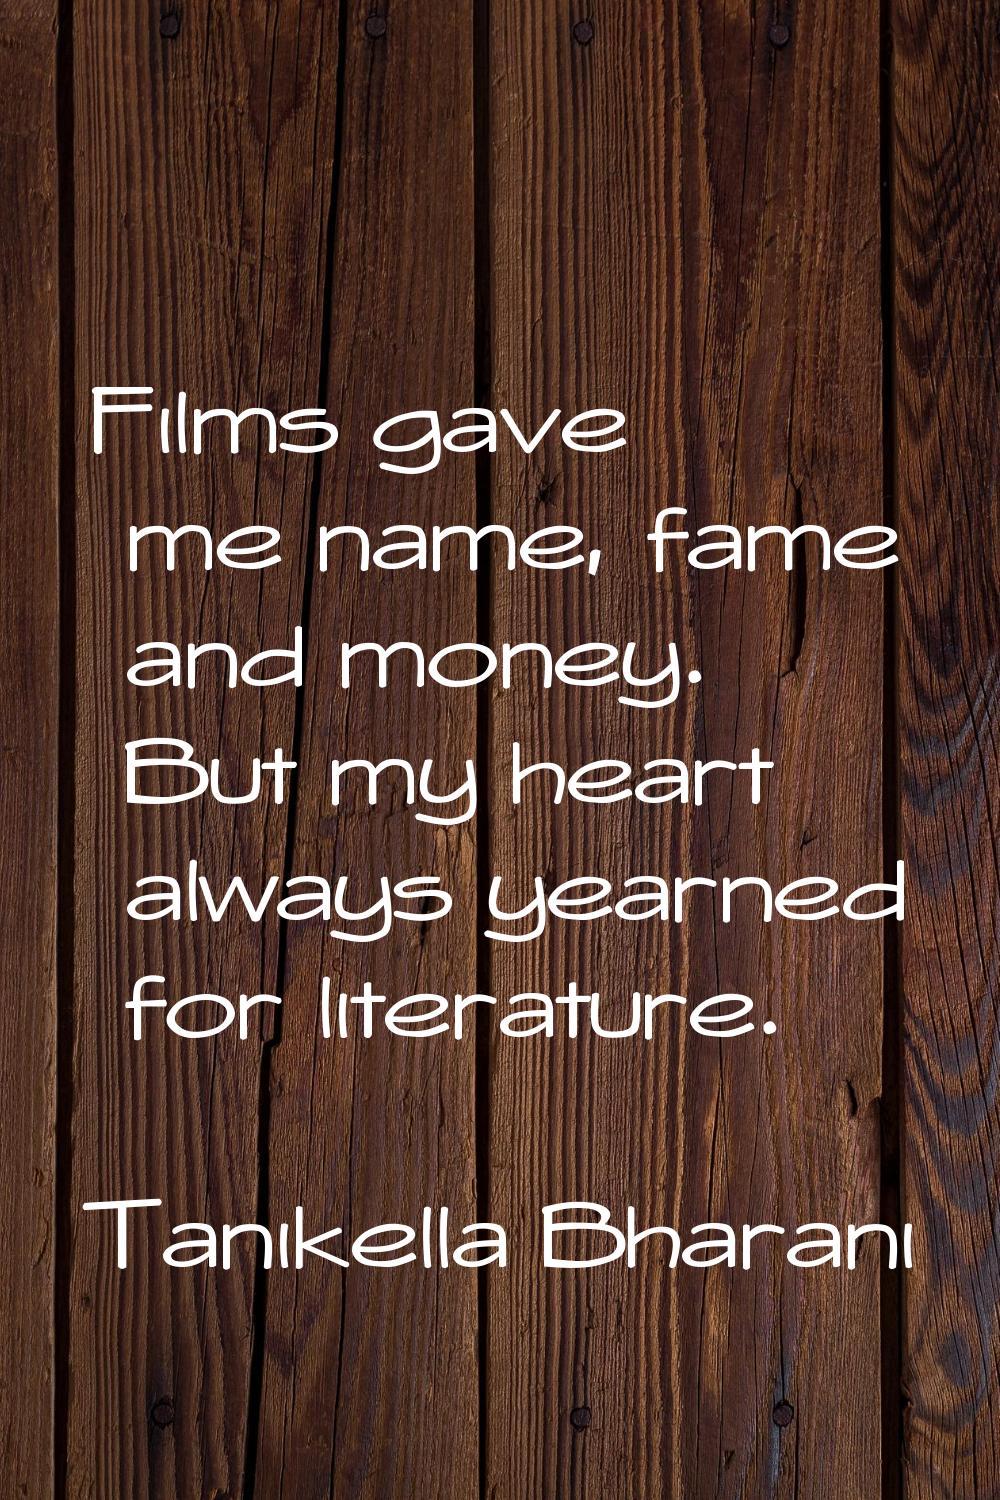 Films gave me name, fame and money. But my heart always yearned for literature.